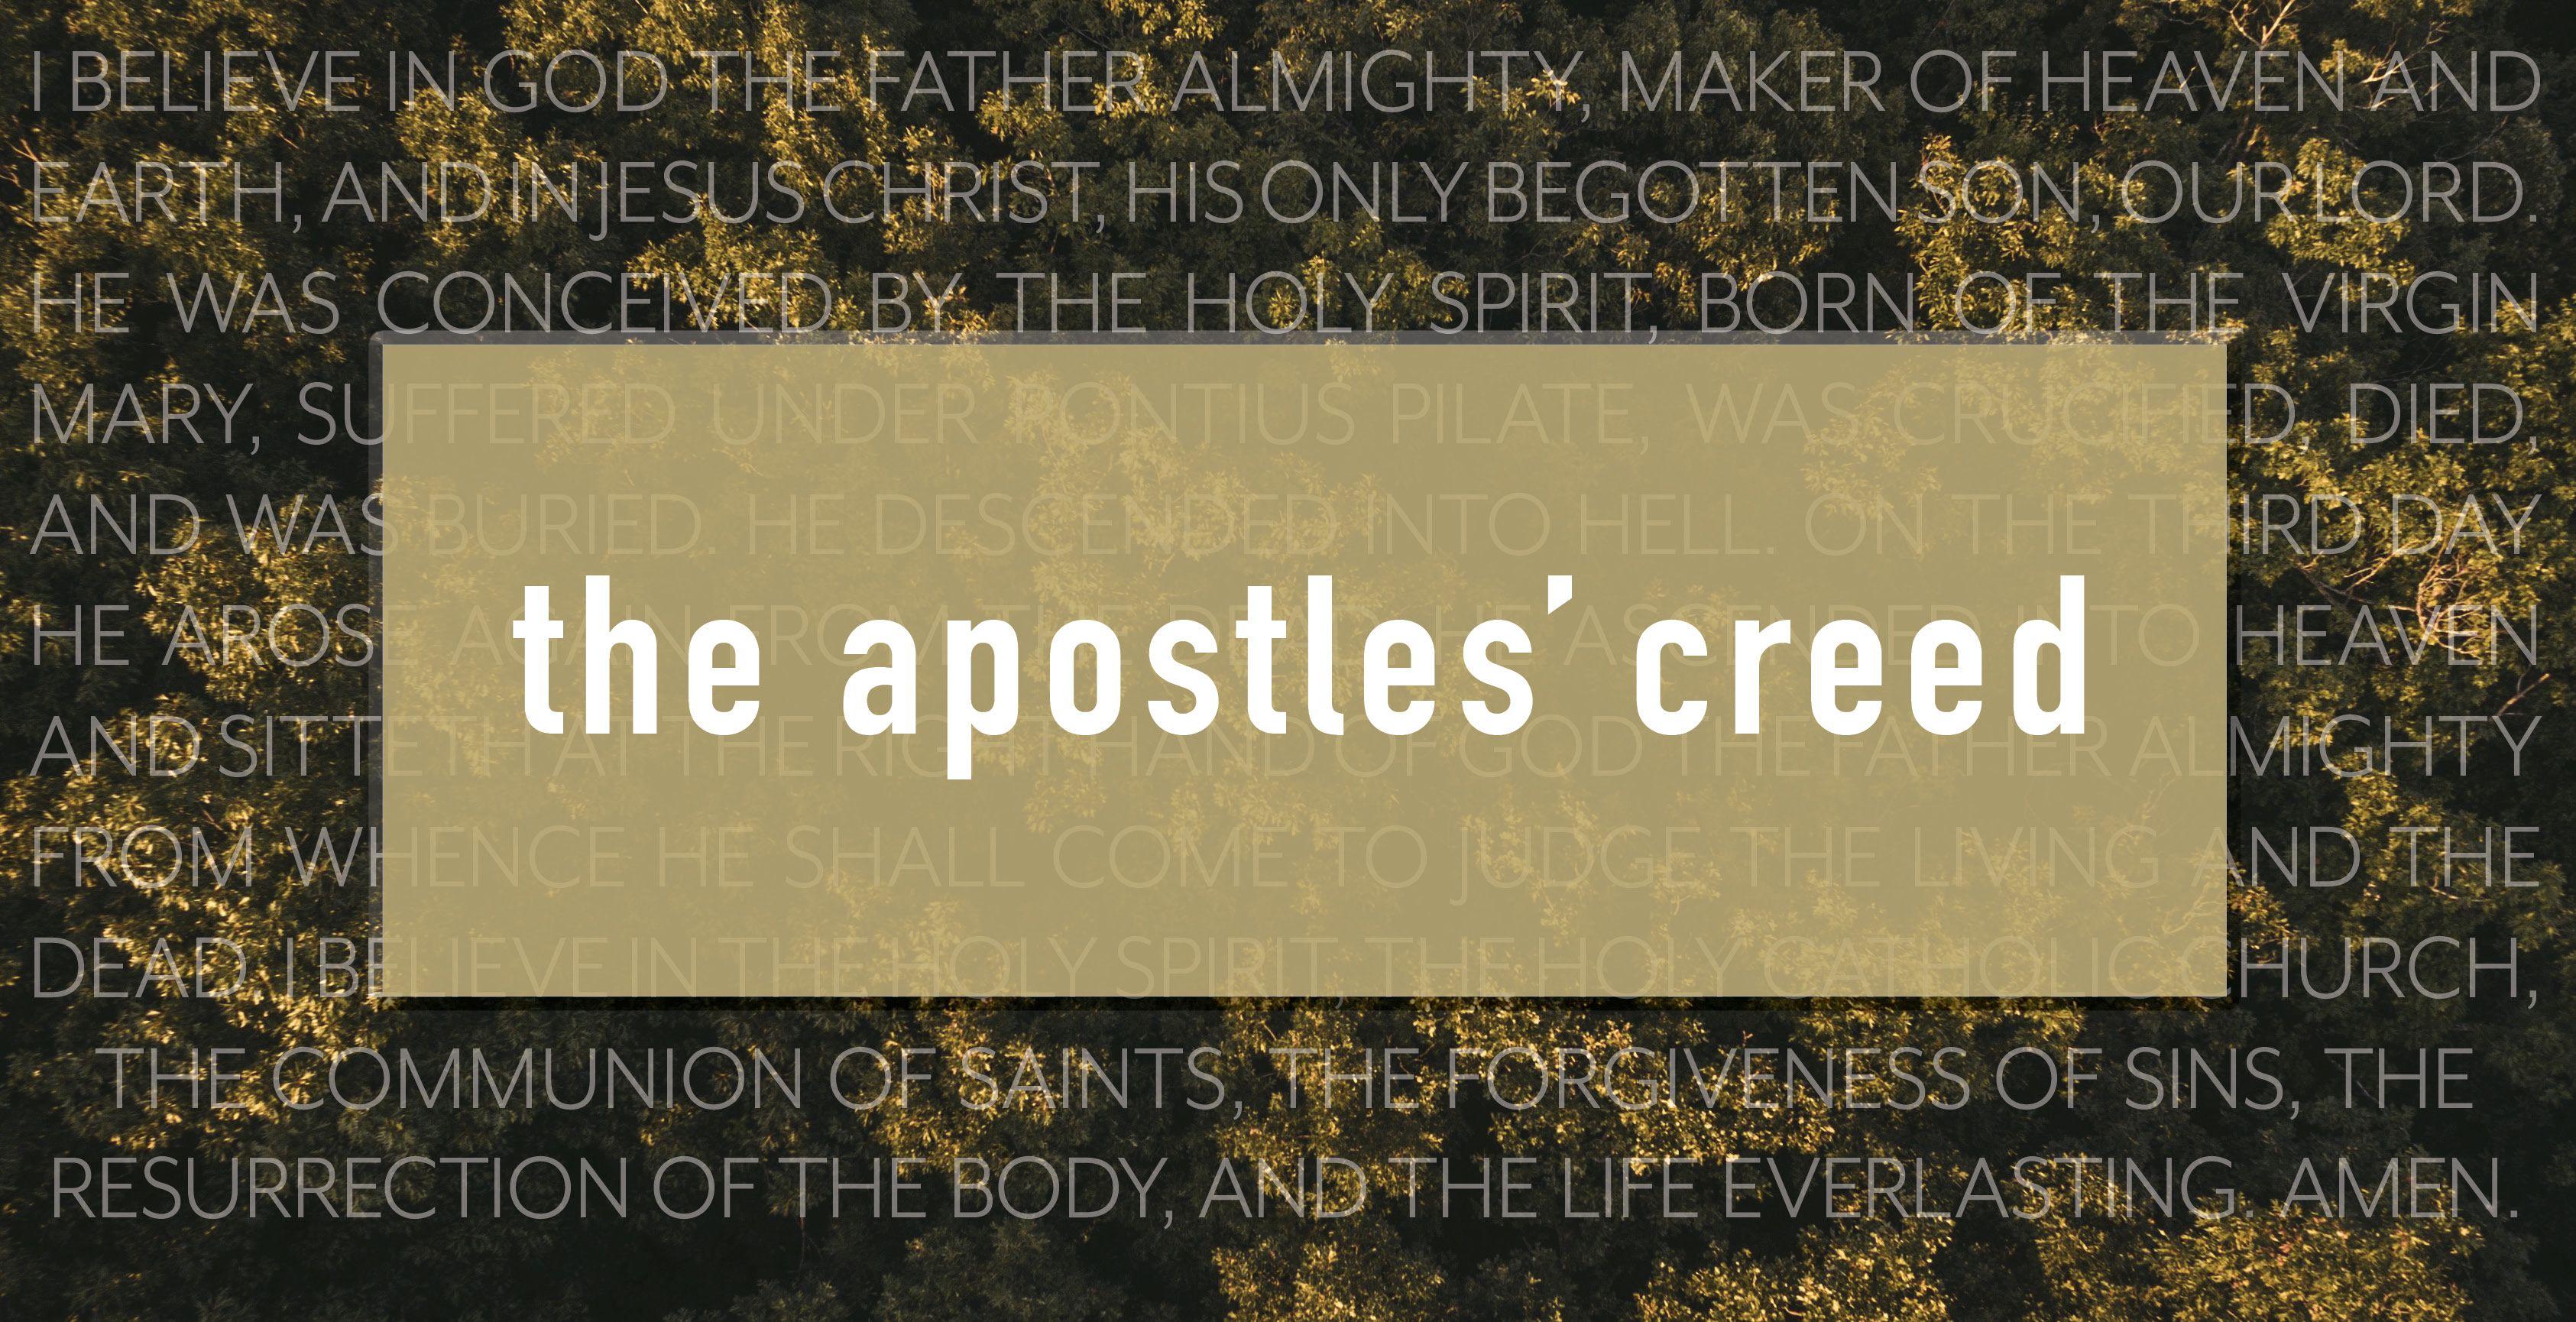 Apostles Creed 7: Our Lord